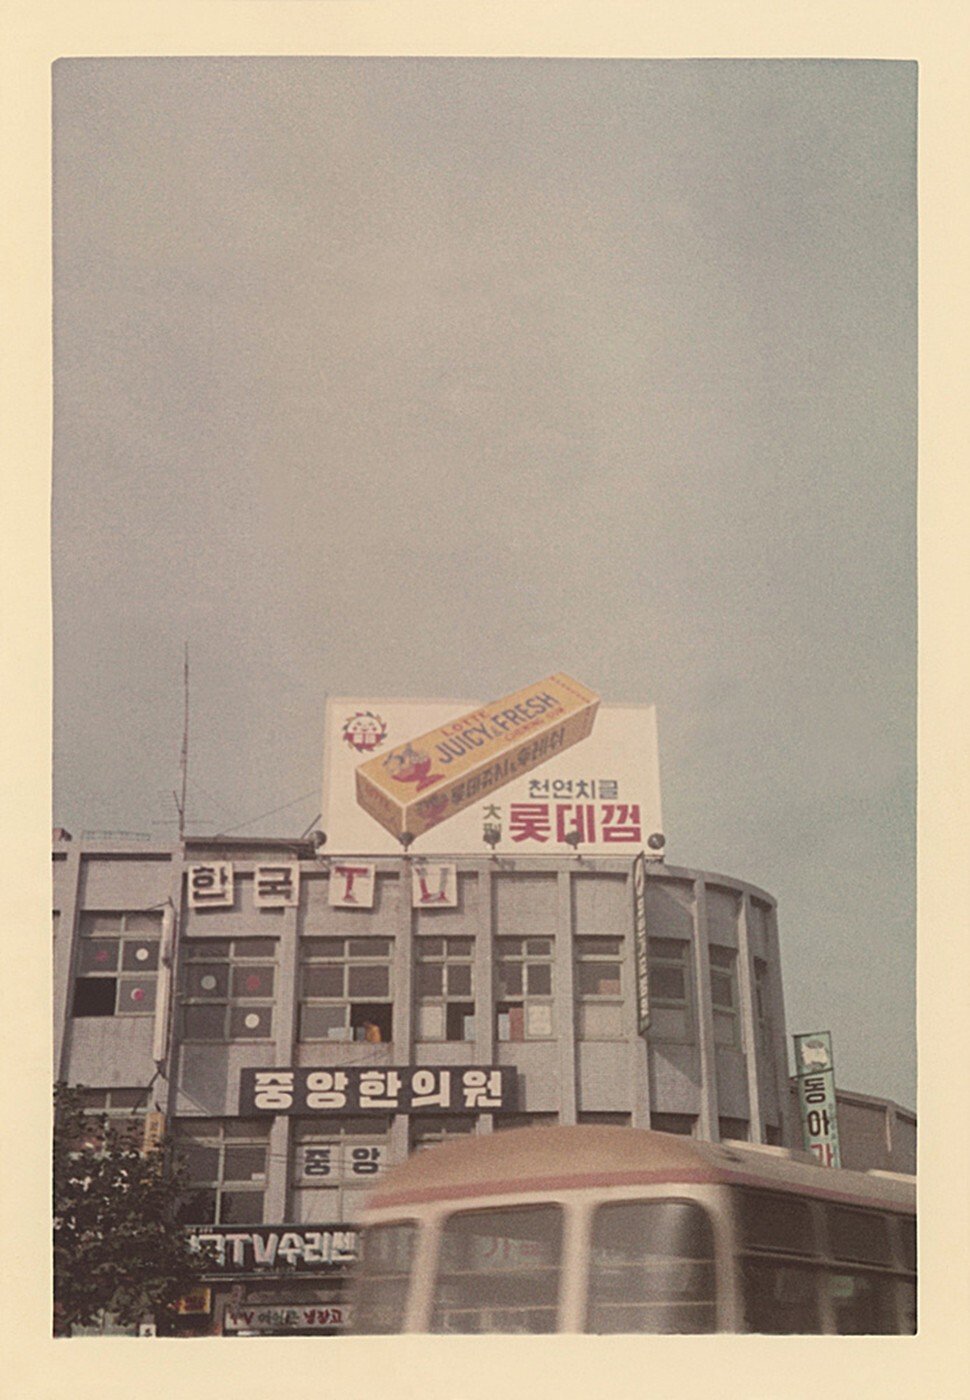 An early advertisement for Lotte’s Juicy & Fresh gum on a billboard in Seoul, South Korea.